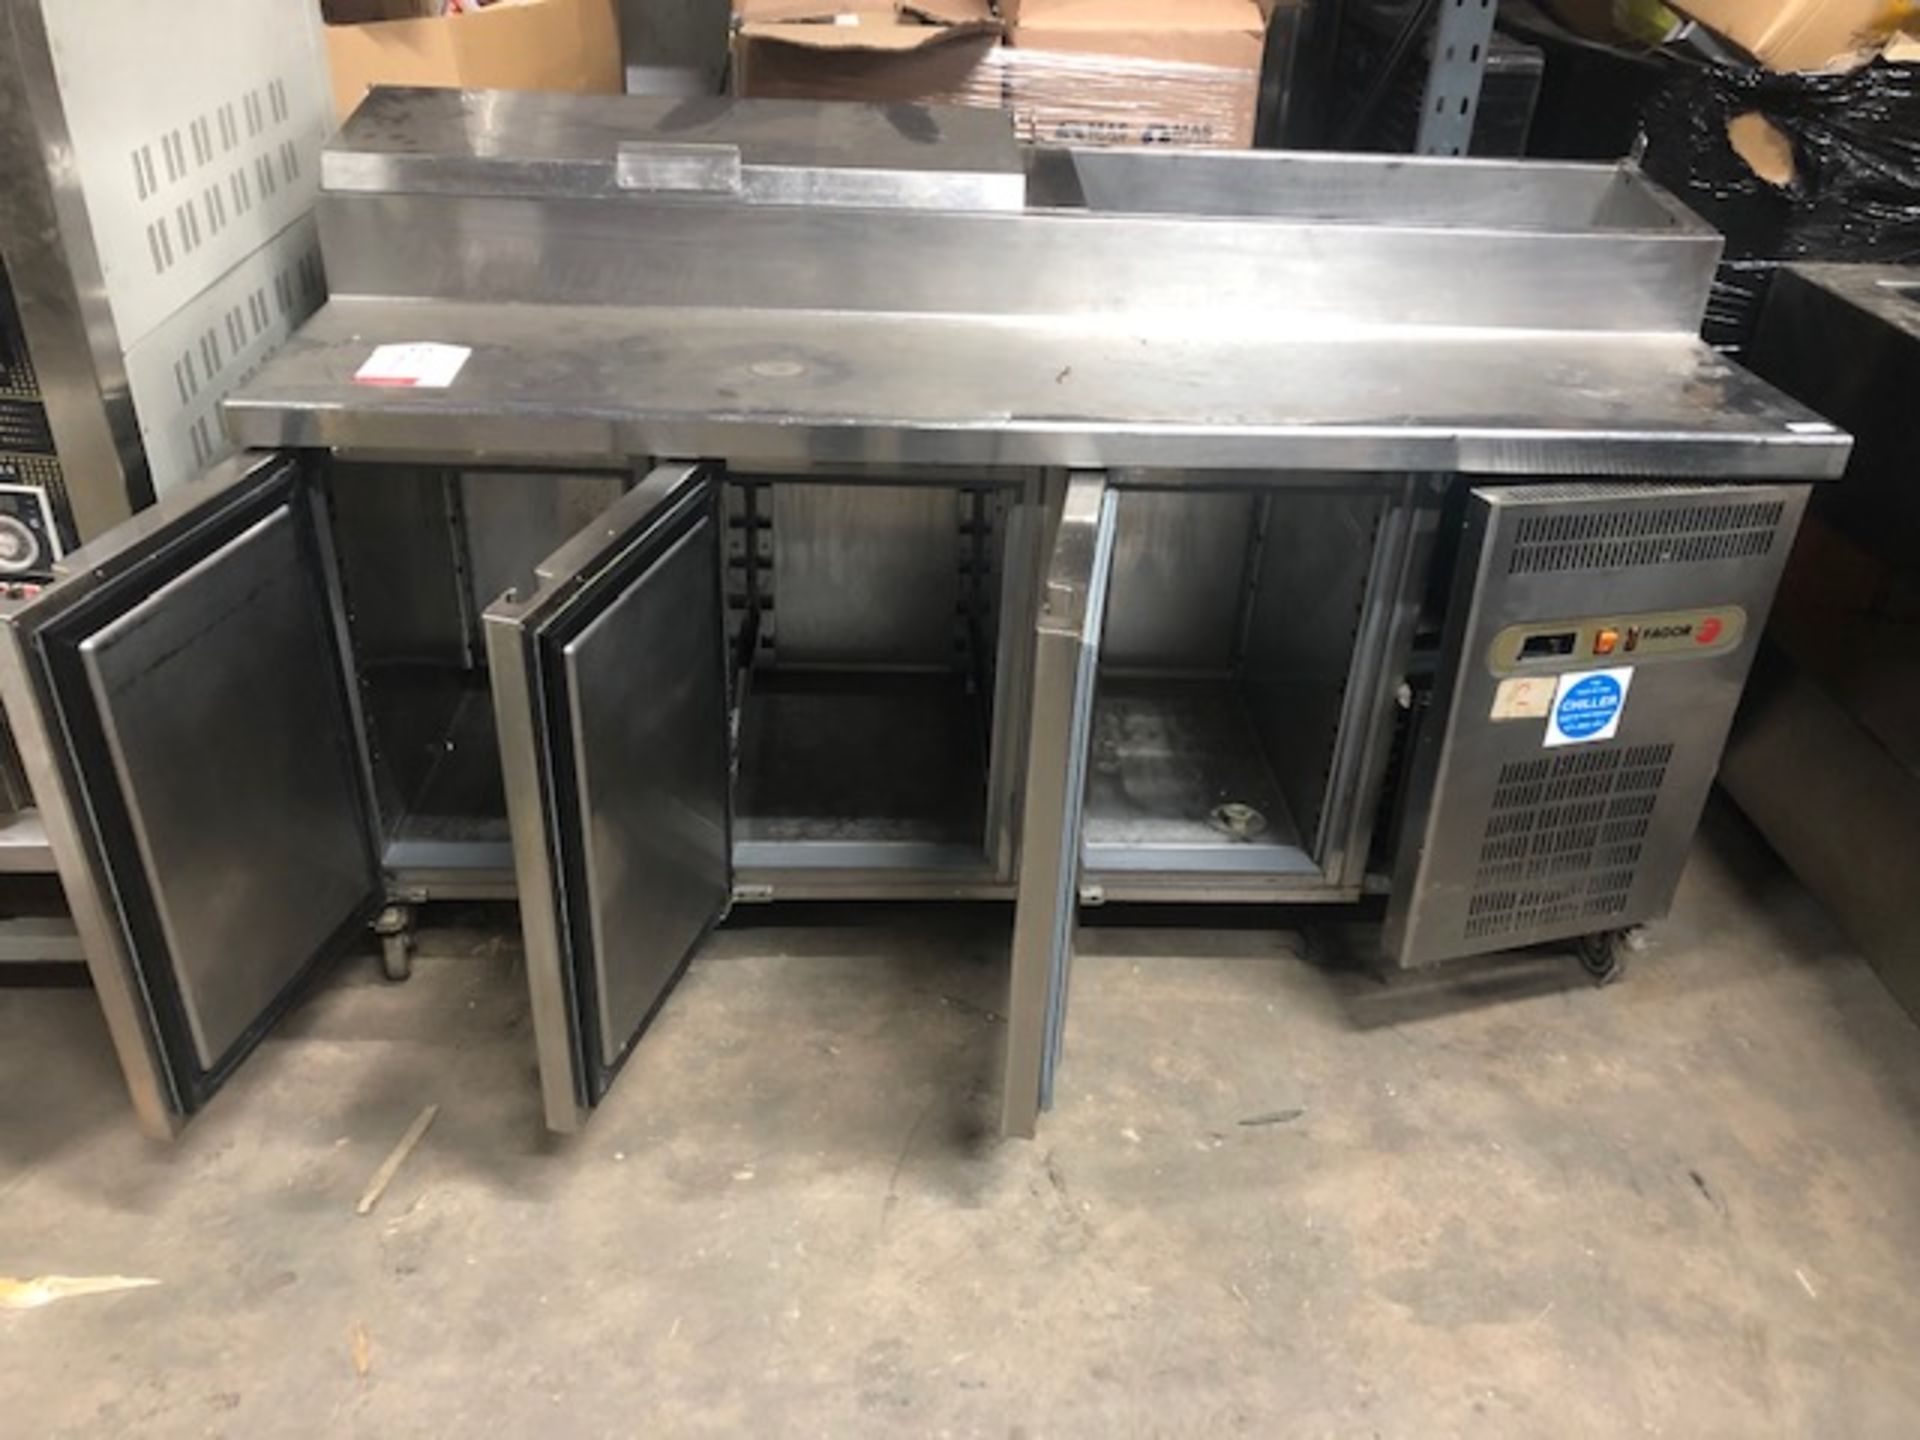 Fagor MPZ1-200 Stainless Steel Prep Counter w/ Refrigerated Cabinets - Image 2 of 6